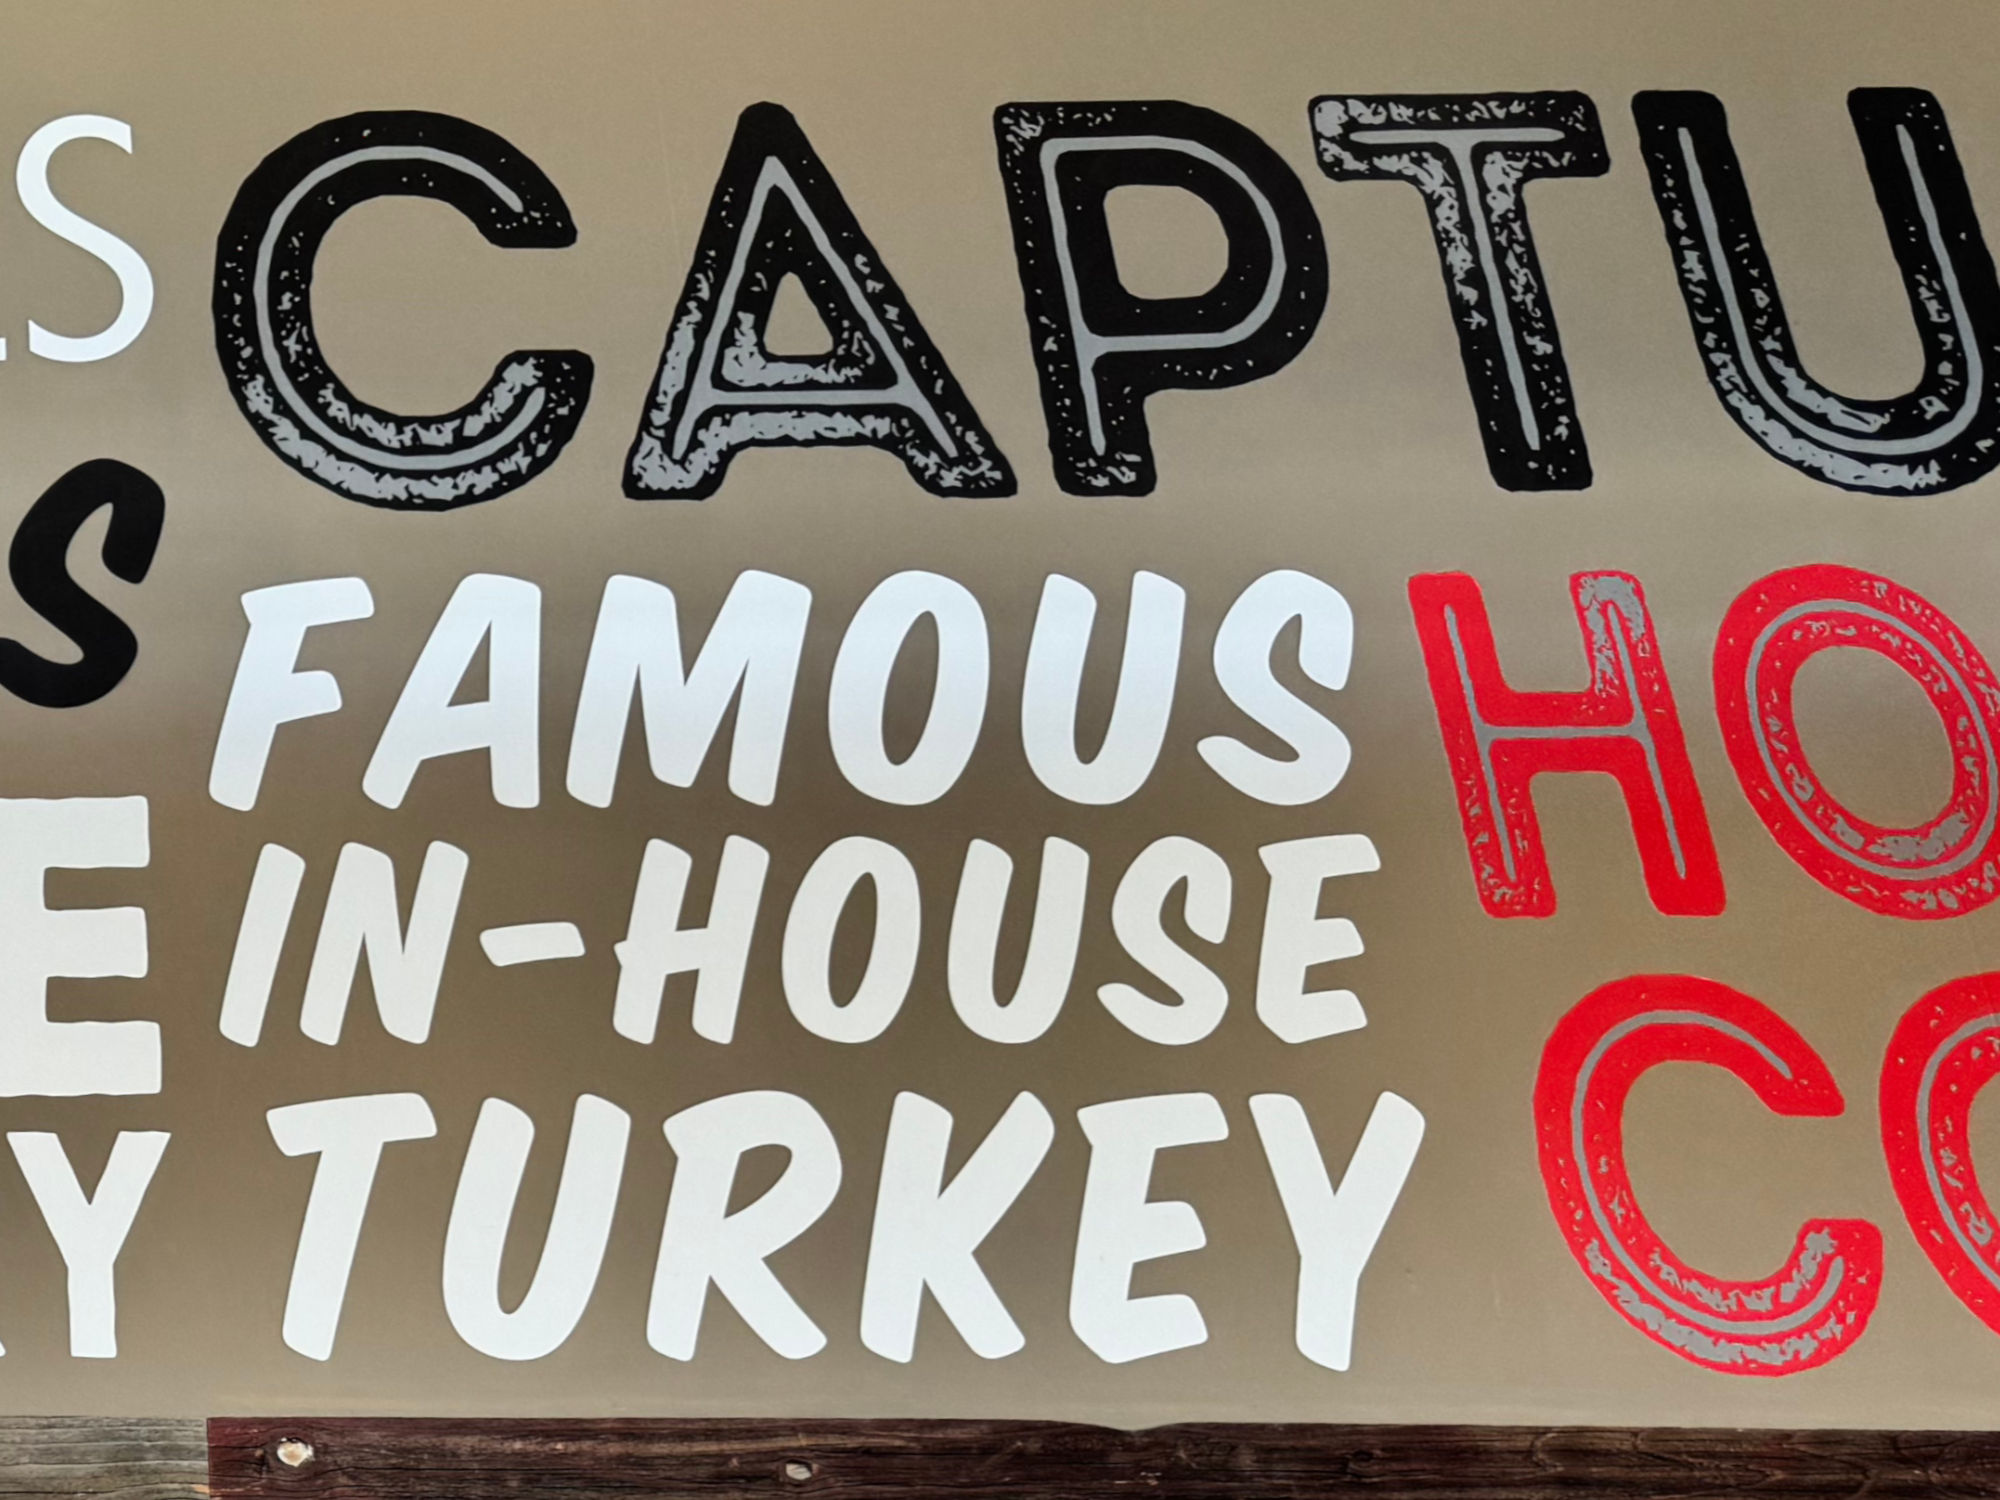 Capriotti's Famous In-House Turkey